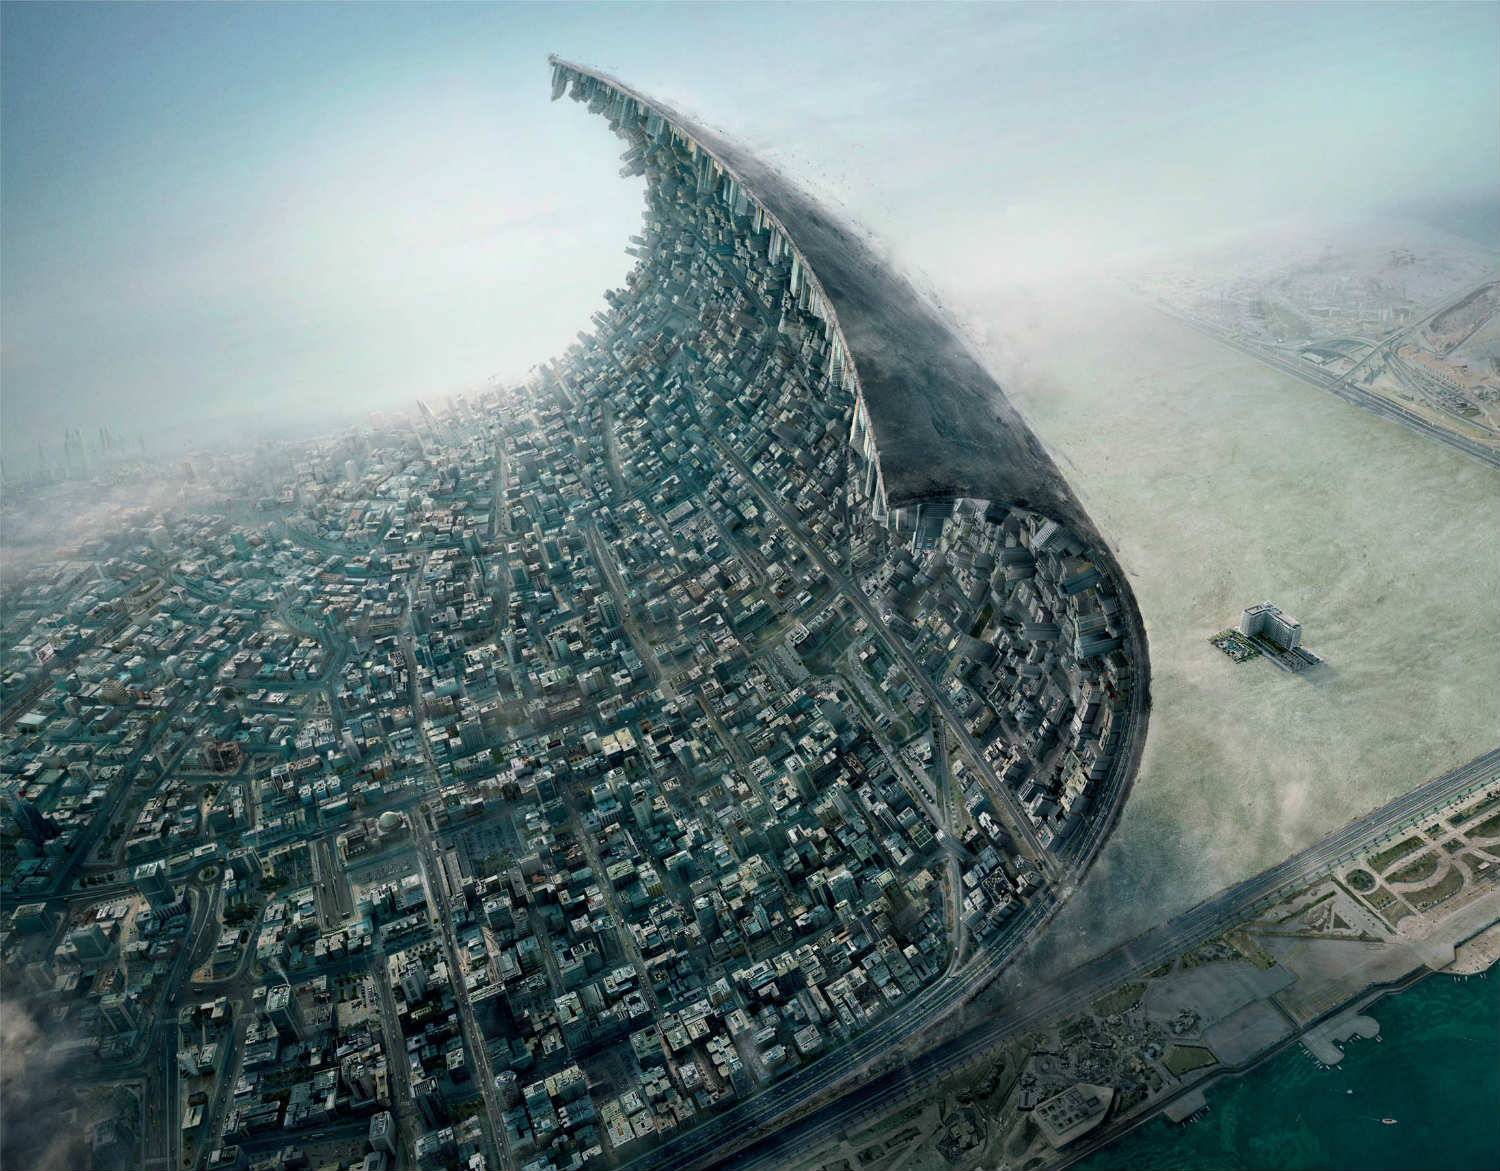 What Would It Look Like If You Could Peel A City Off Earth’s Crust?